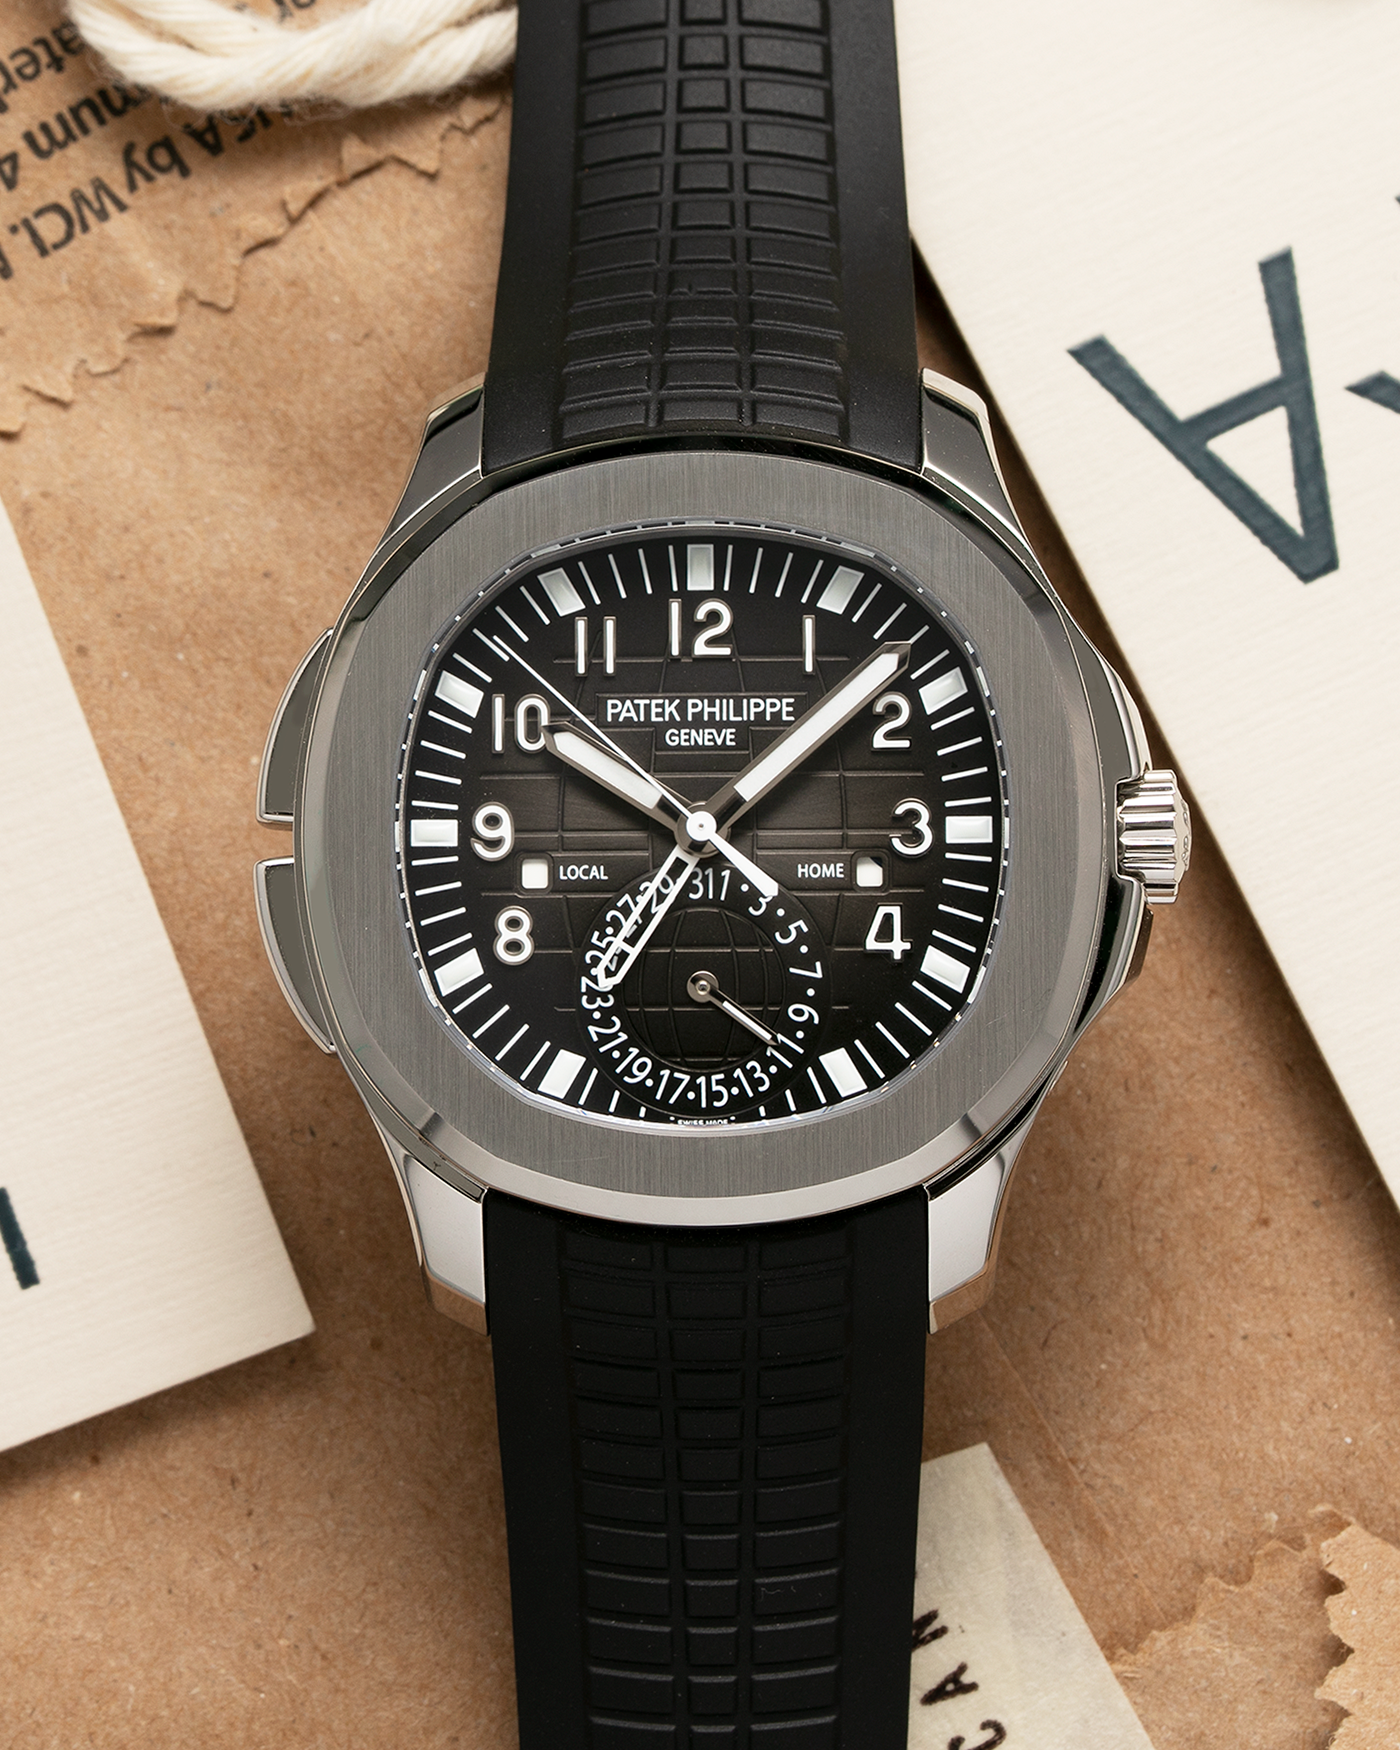 Brand: Patek Philippe Year: 2021 Model: Aquanaut Reference Number: 5164A Material: Stainless Steel Movement: Calibre 324 C FUS Case Diameter: 40.8mm Bracelet: Uncut Patek Philippe Aquanaut Black Tropical Rubber Strap with Signed Deployant Clasp